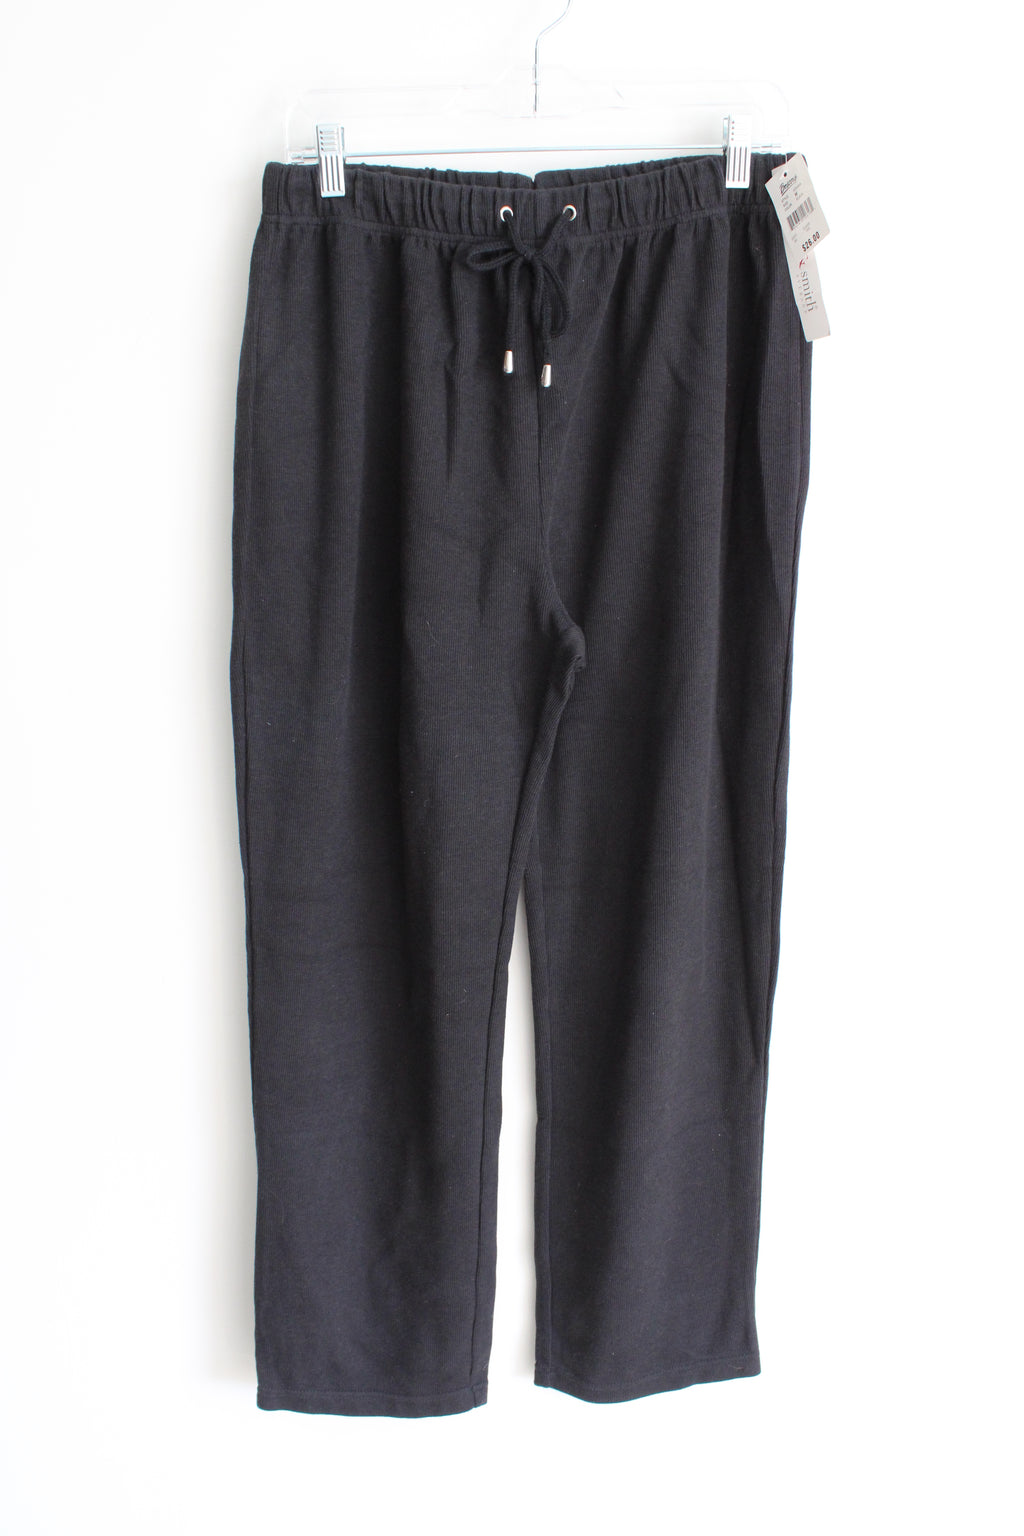 NEW Hasting & Smith Black Knit Pants | M